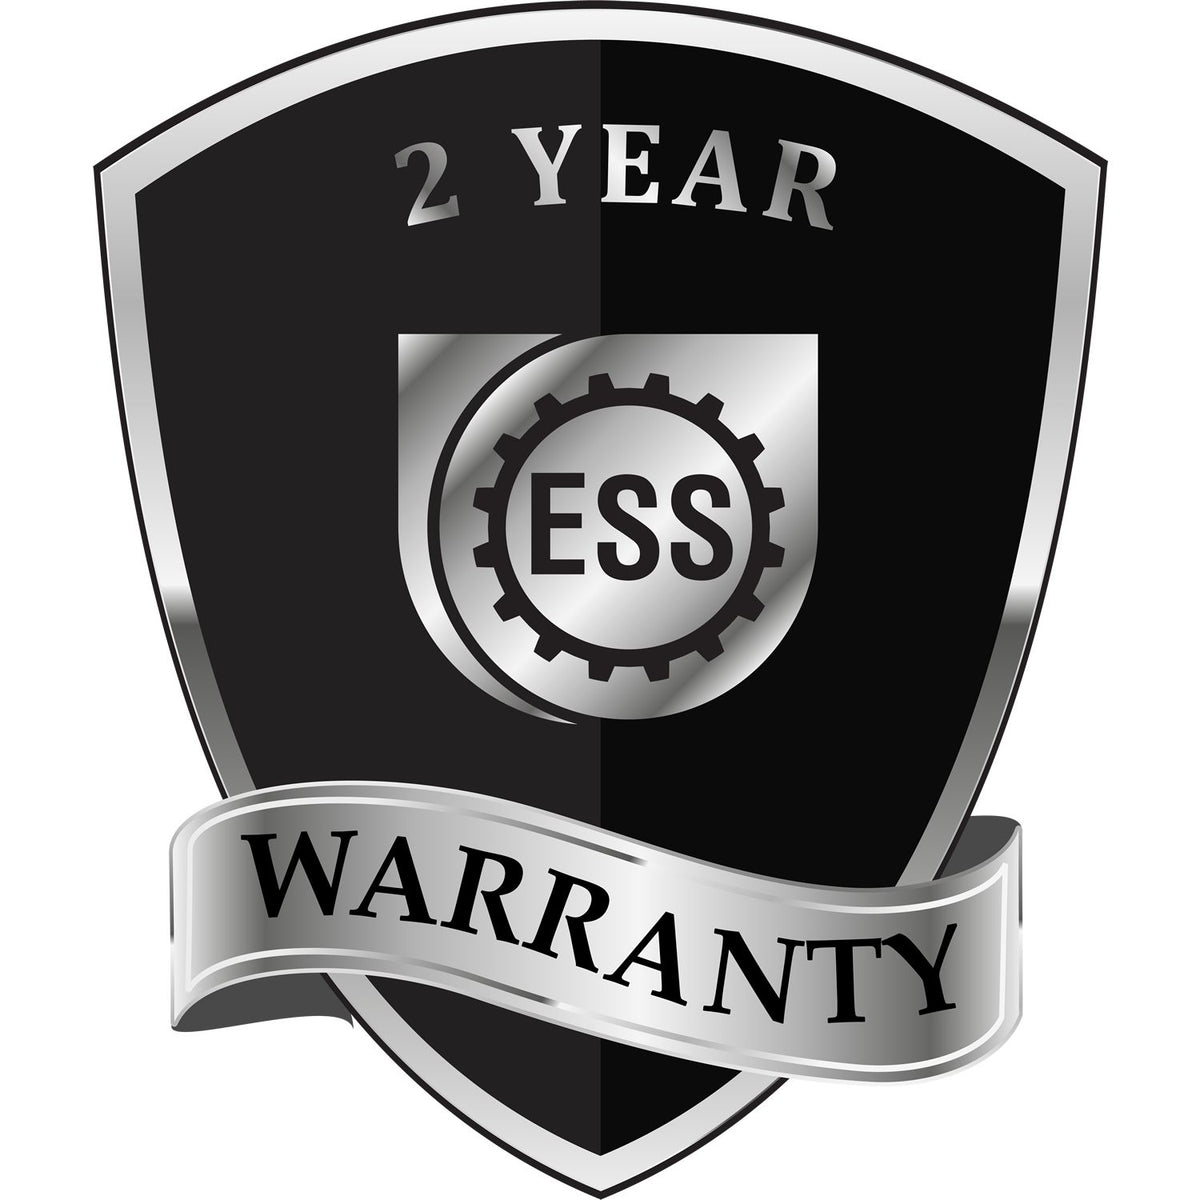 A badge or emblem showing a warranty icon for the Heavy Duty Cast Iron Maine Engineer Seal Embosser